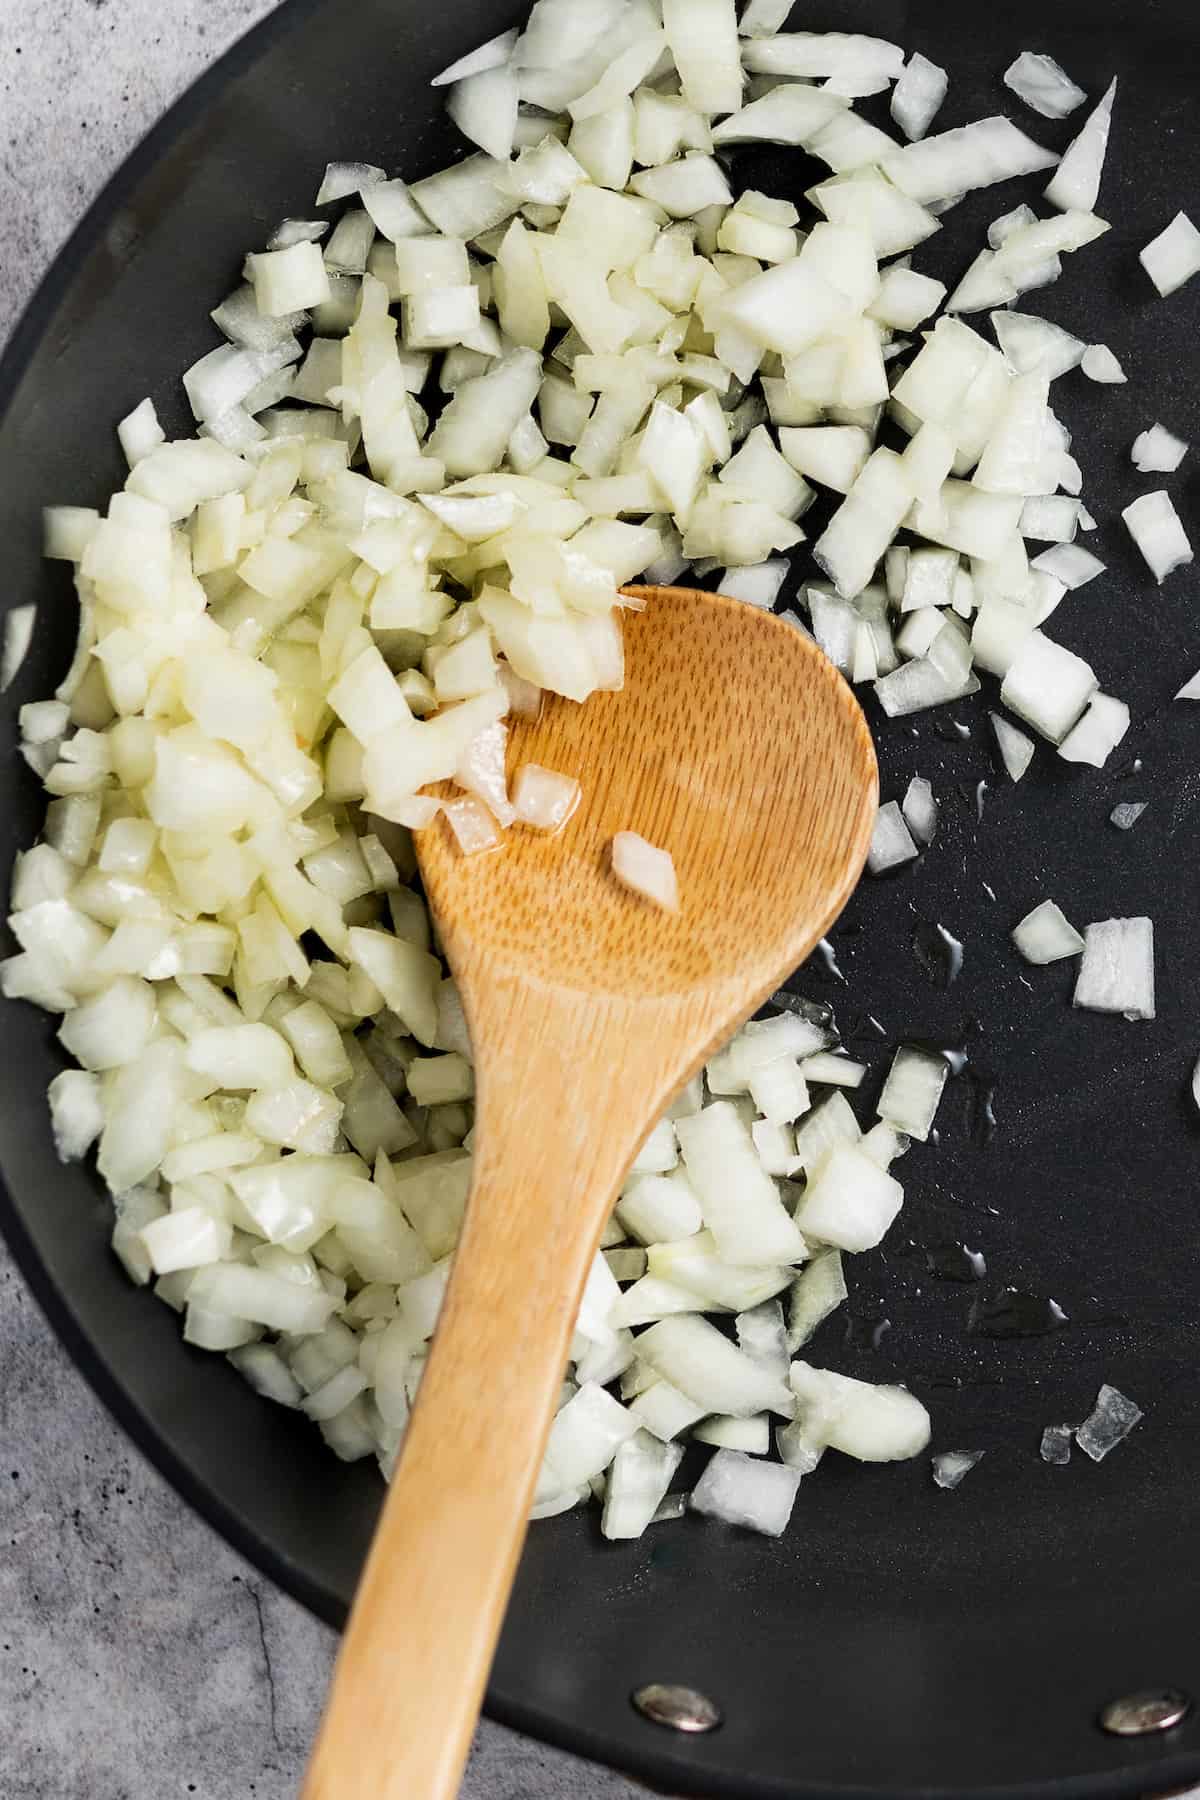 Cooking the onions in the pan.